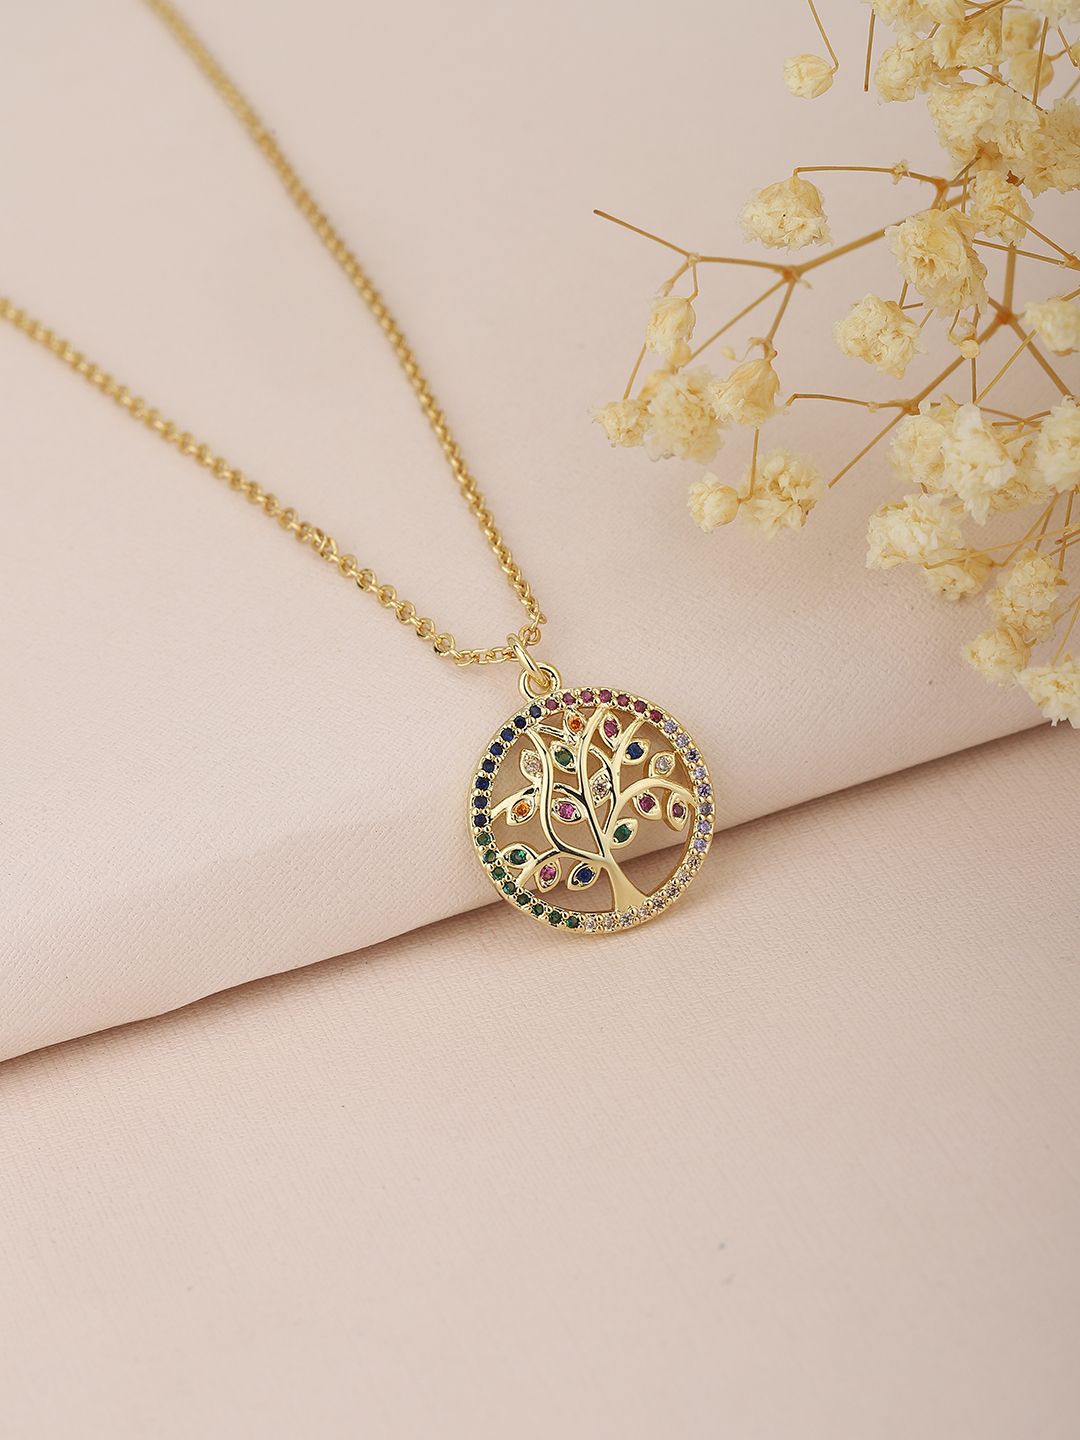 Carlton London Gold-Plated CZ-Studded Tree of Life Necklace Price in India